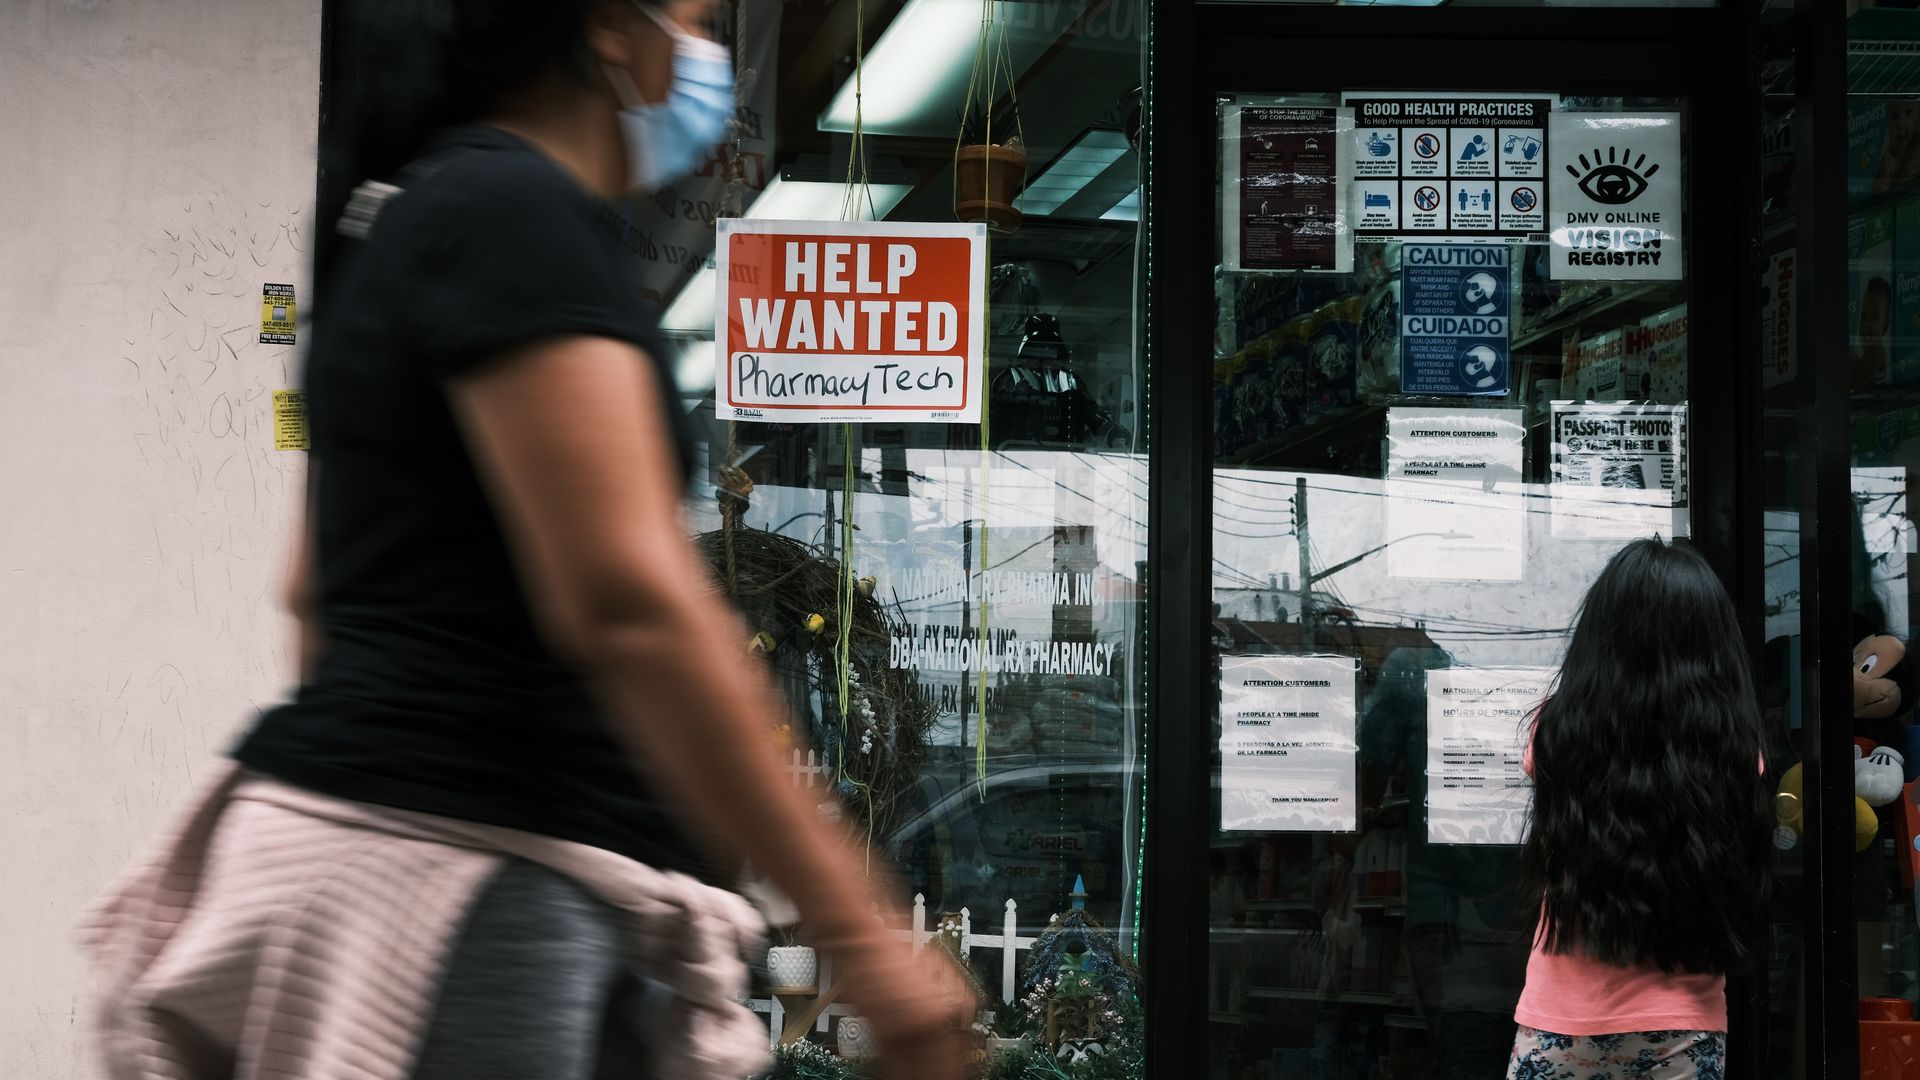 A woman is seen walking past a "Help Wanted" sign in New York City.